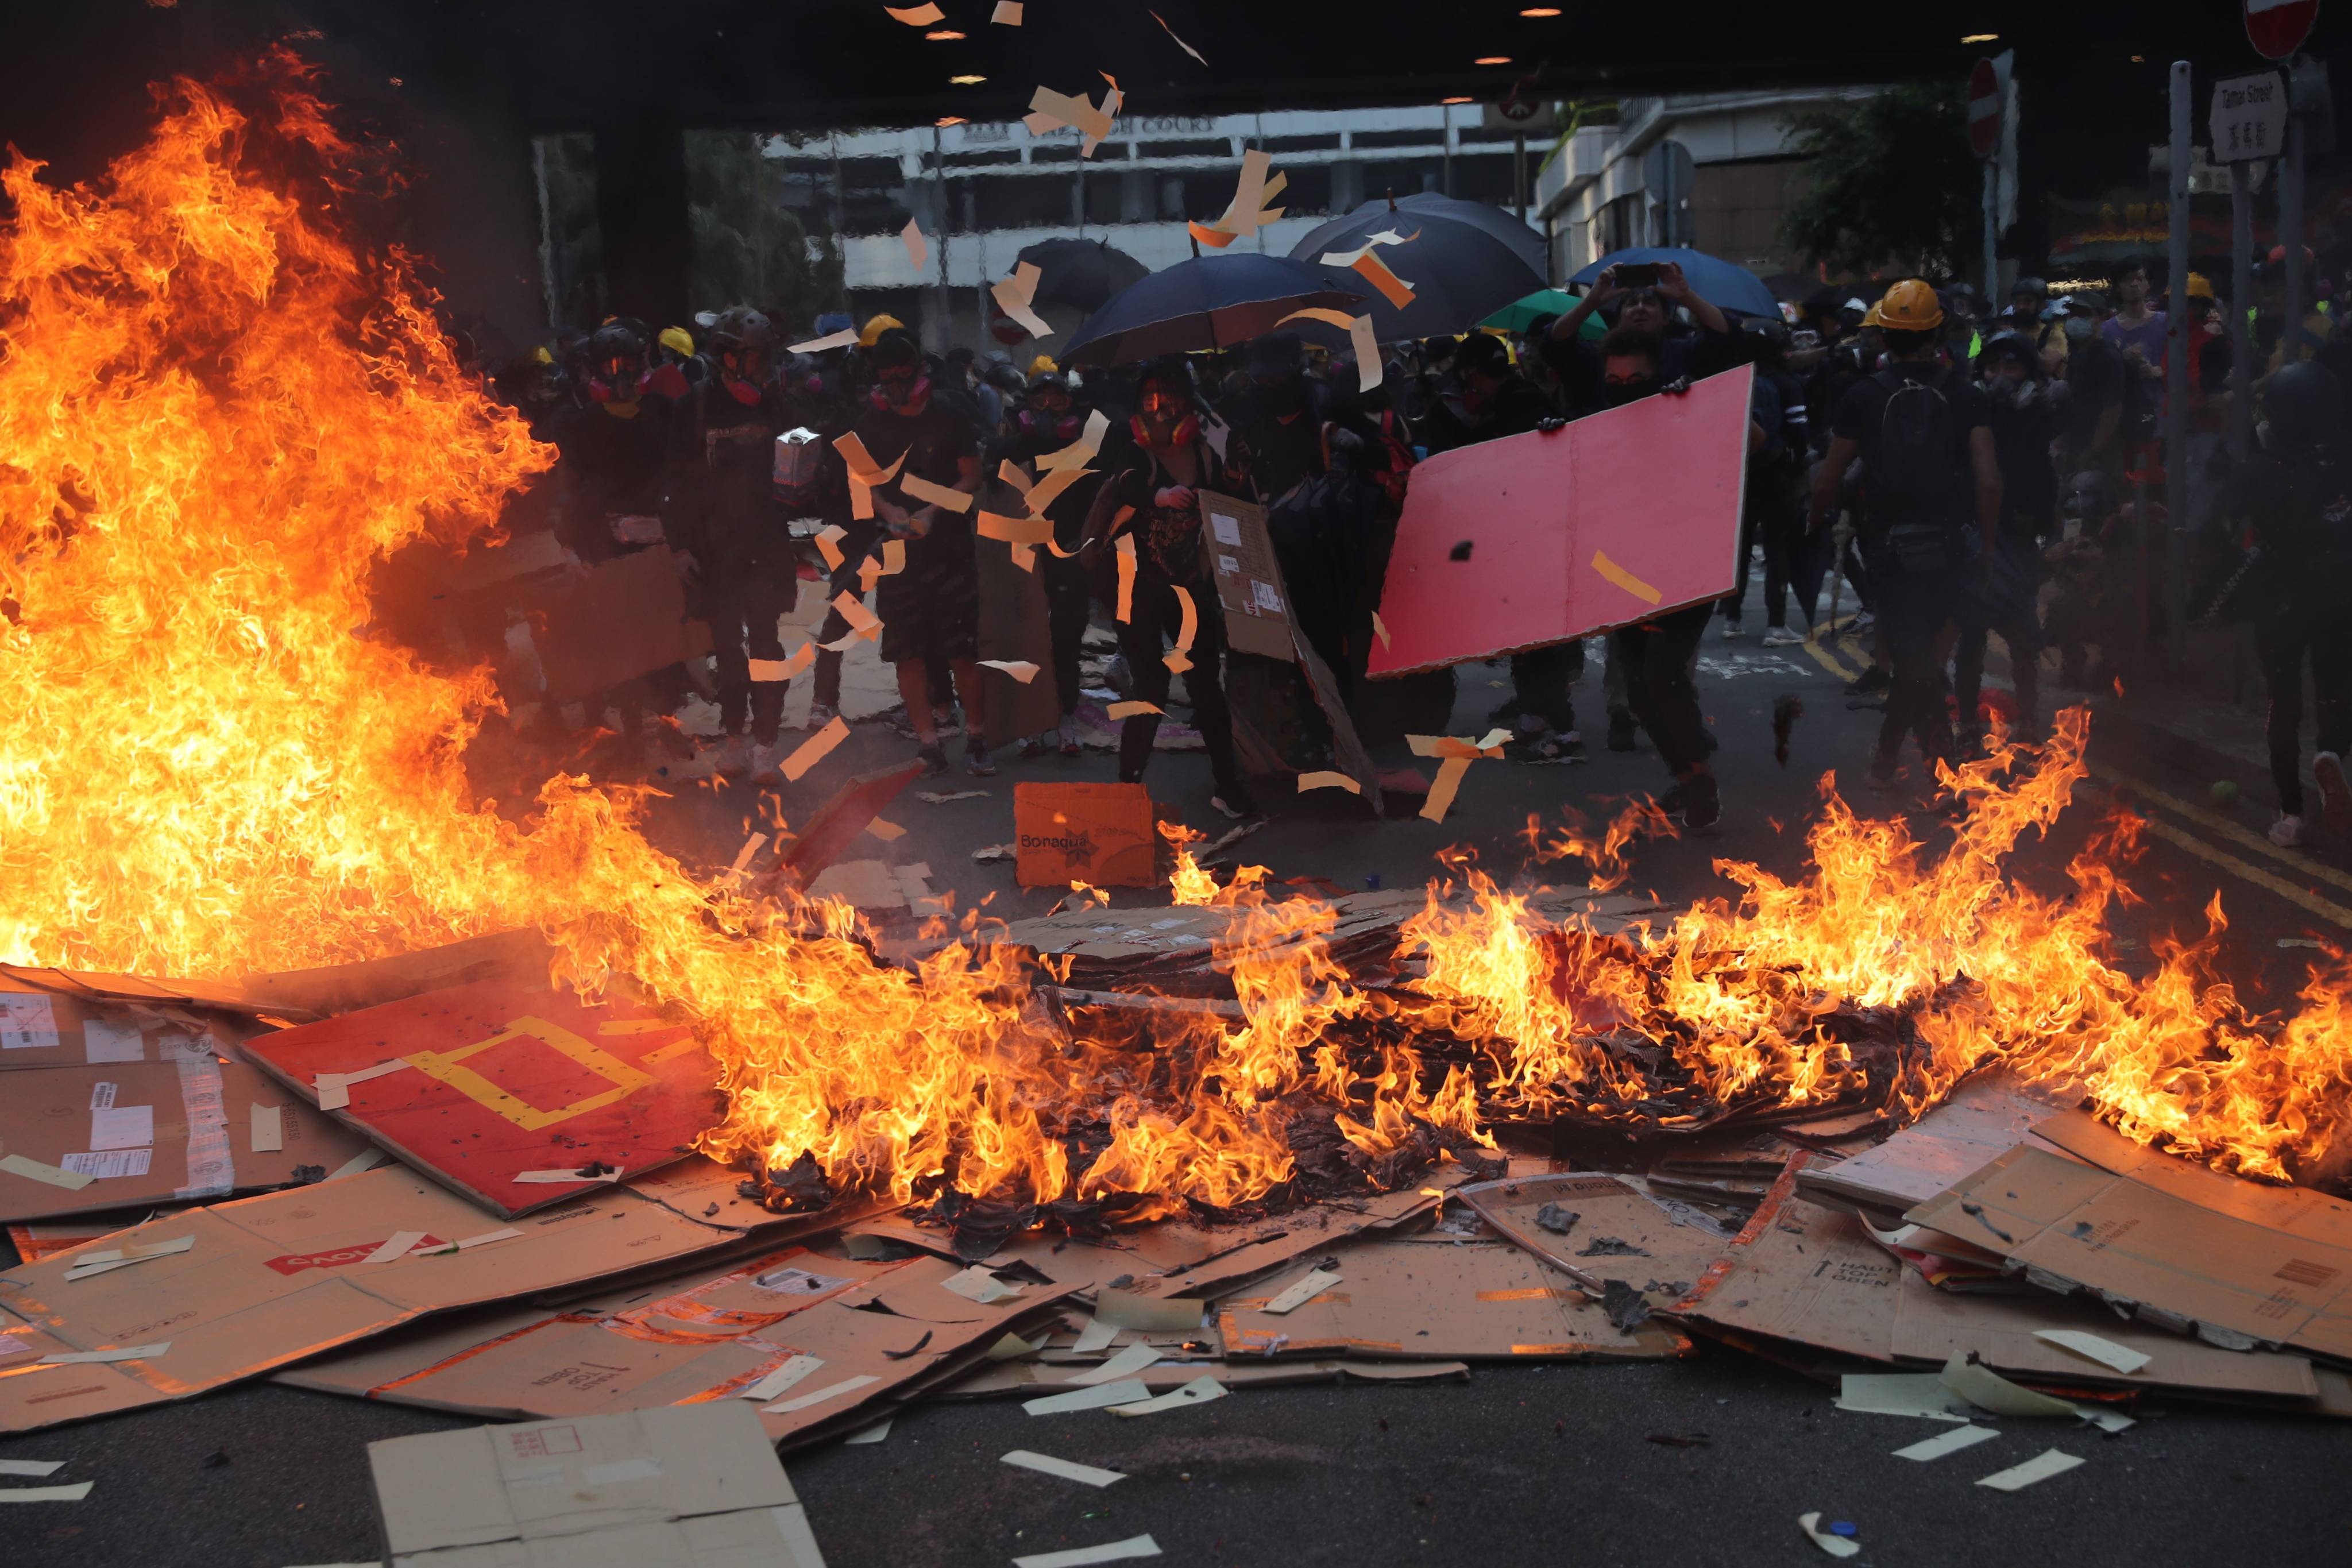 Anti-government protesters set fire and toss paper offerings in the air on Tamar Street, in Admiralty. Photo: Sam Tsang